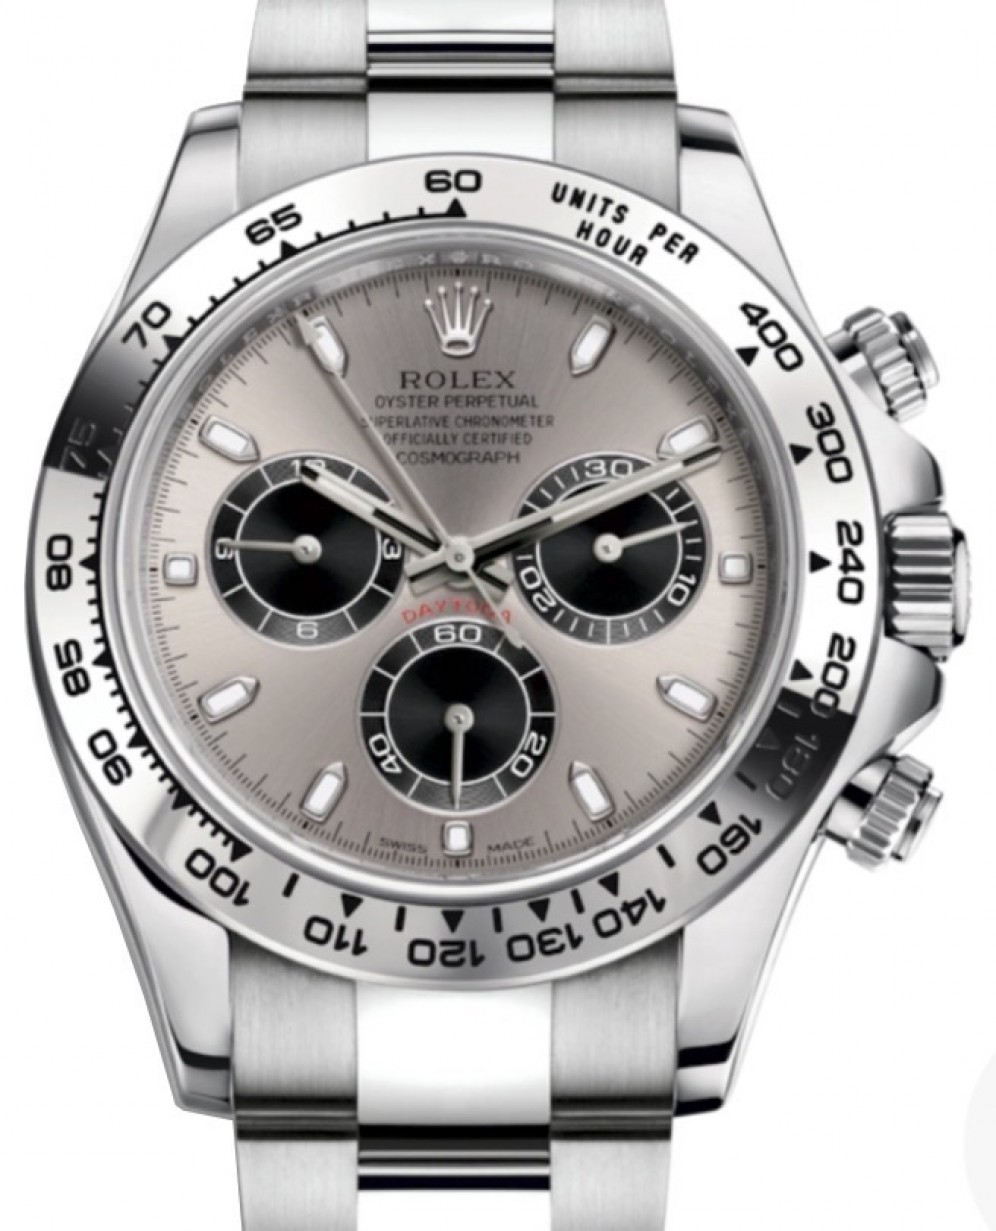 Rolex Cosmograph Daytona 116509 Steel Index Tachymetre White Gold Oyster 40mm - BRAND